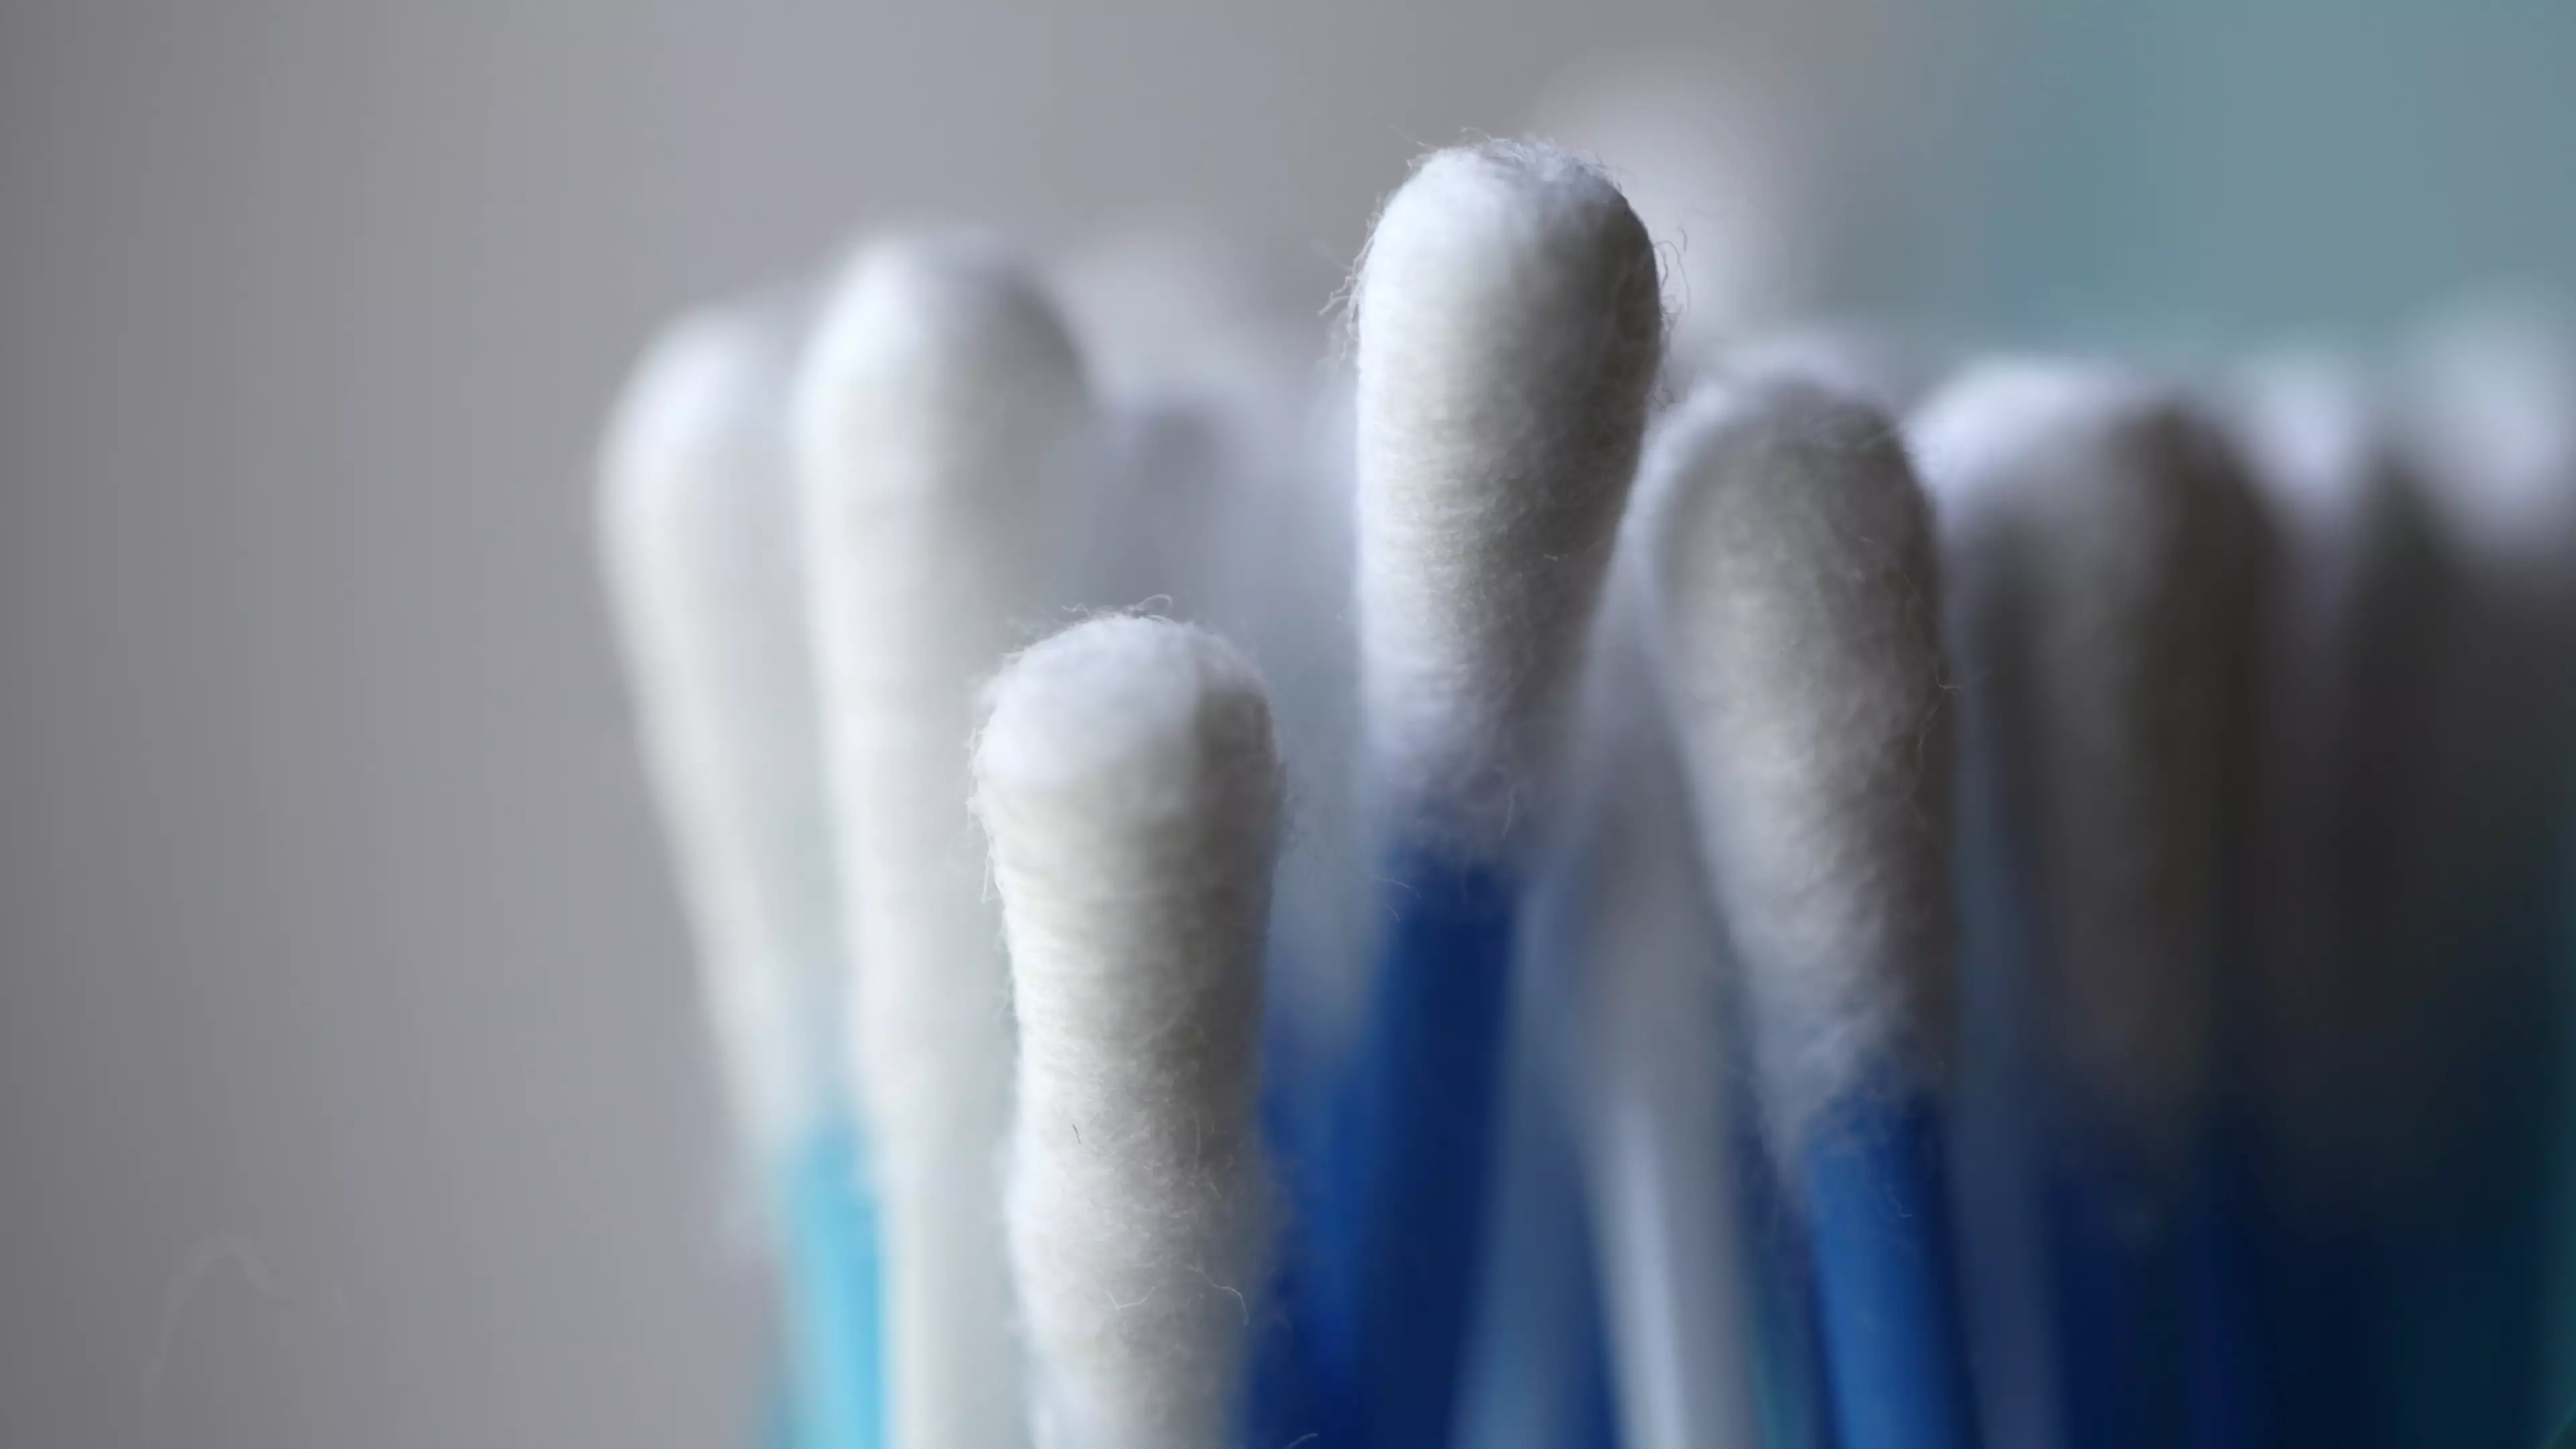 Man Gets Deadly Skull Infection After Using Cotton Buds To Clean His Ears